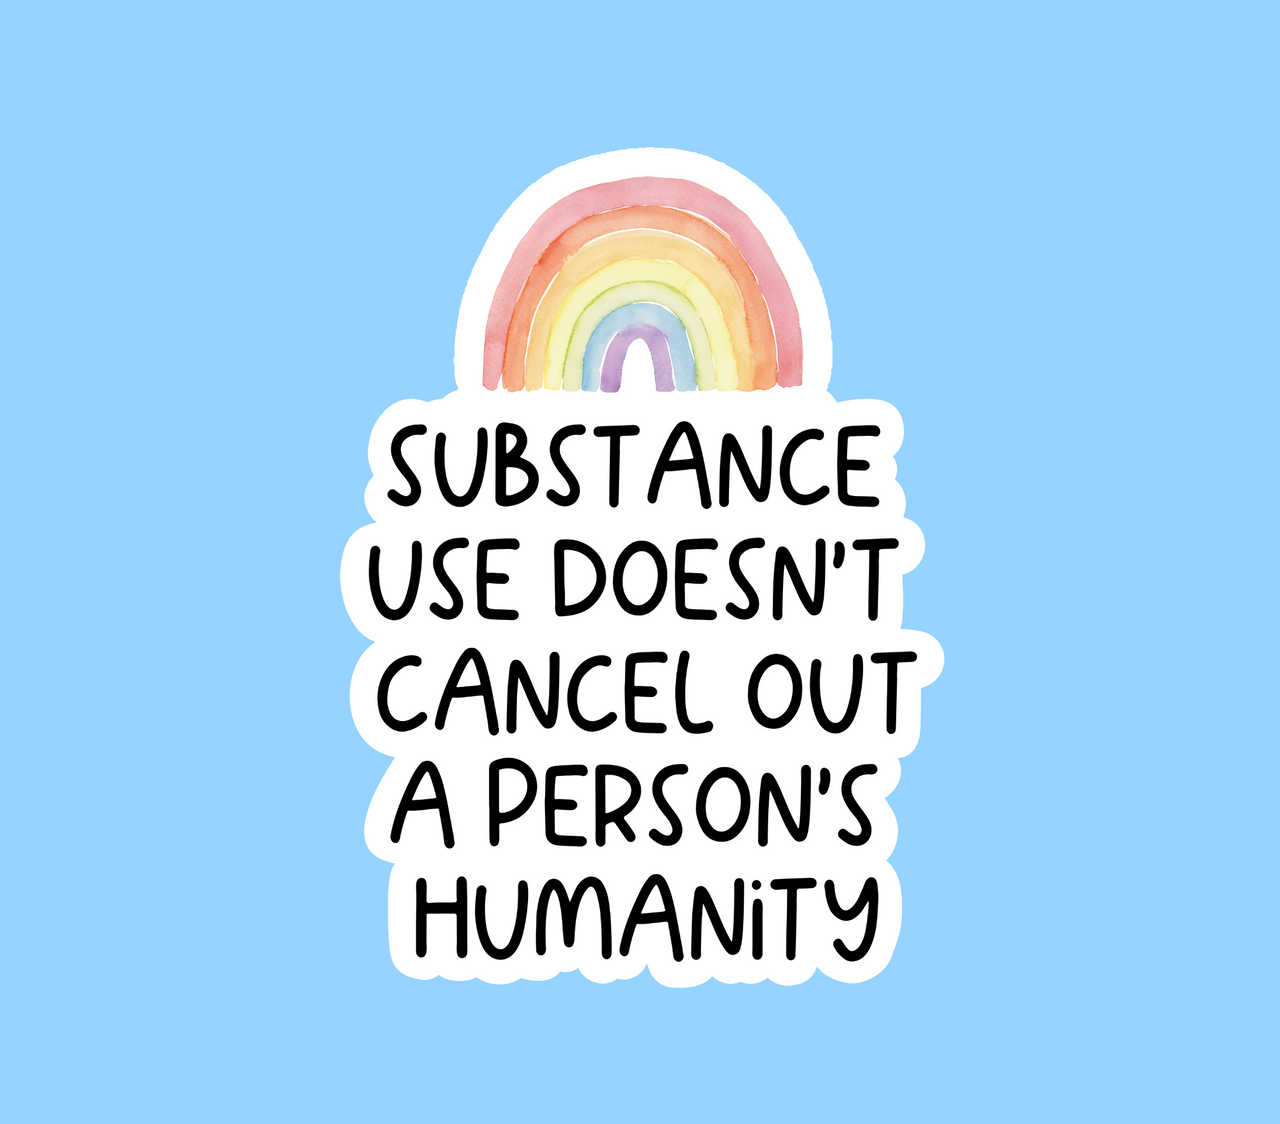 Substance use doesn’t cancel out a person’s humanity